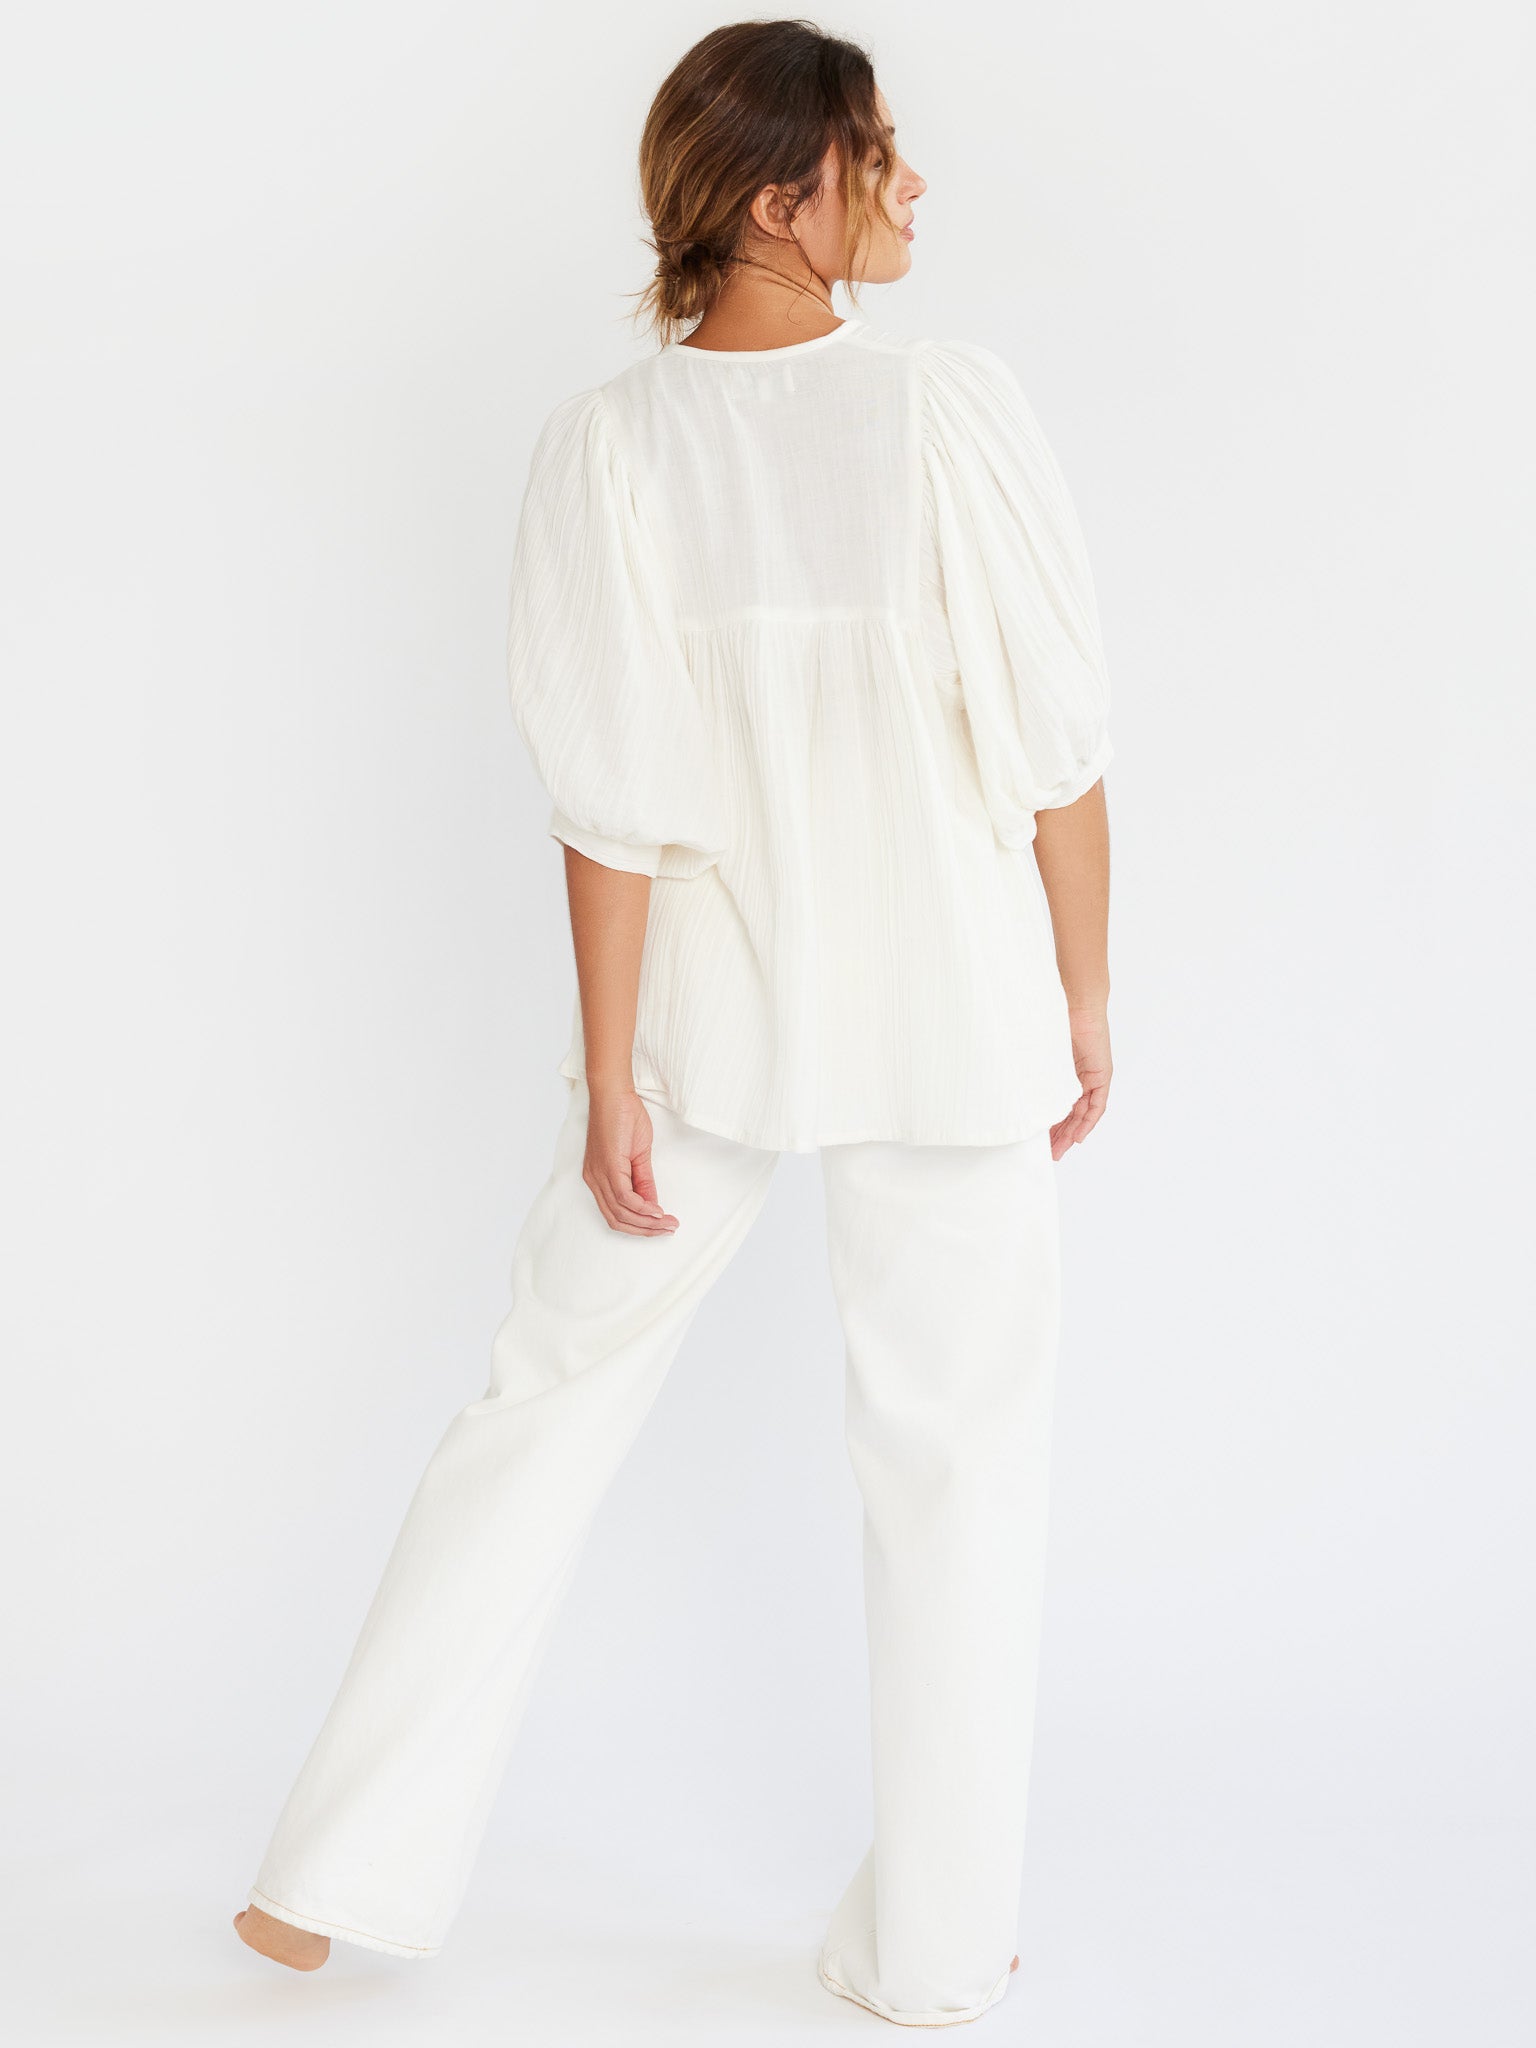 MILLE Clothing Thalia Top in Pearl Double Gauze